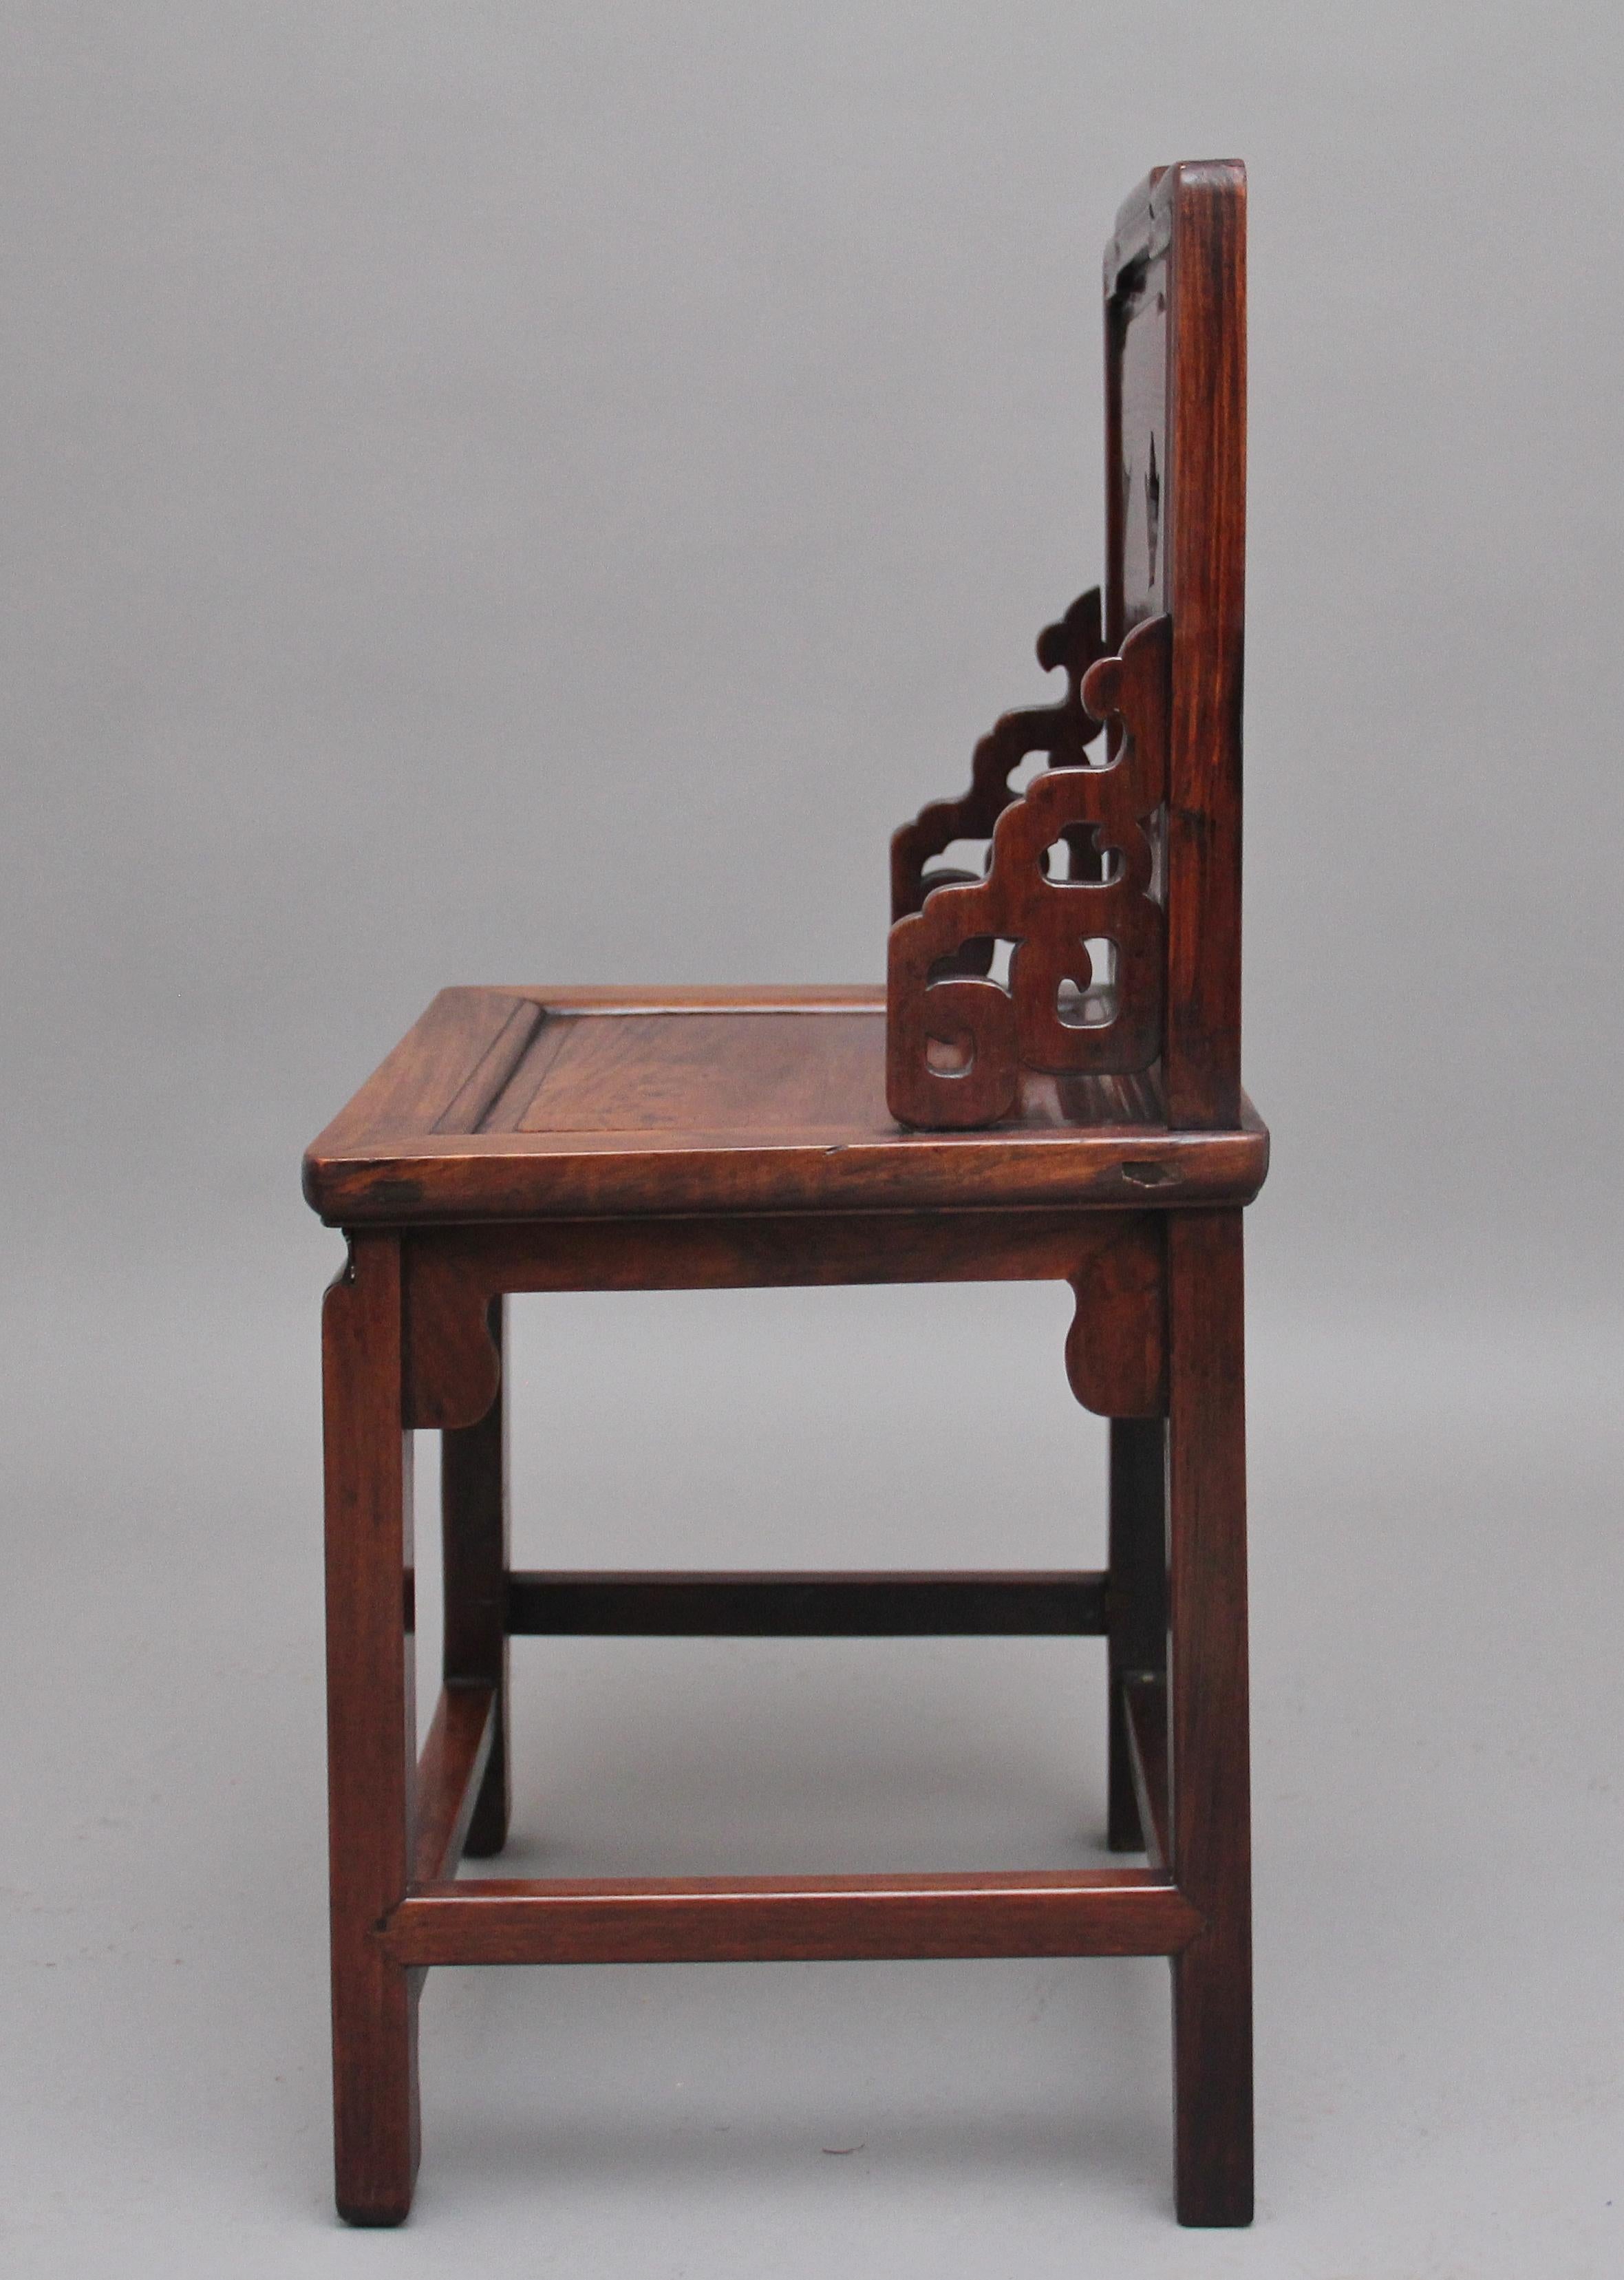 An unusual and rare 19th century Chinese carved hongmu hardwood chair with marble inset, the shaped and moulded back with three decorative cut out shapes of two vases and a teapot, each with a marble inset, carved and shaped corner brackets, nice